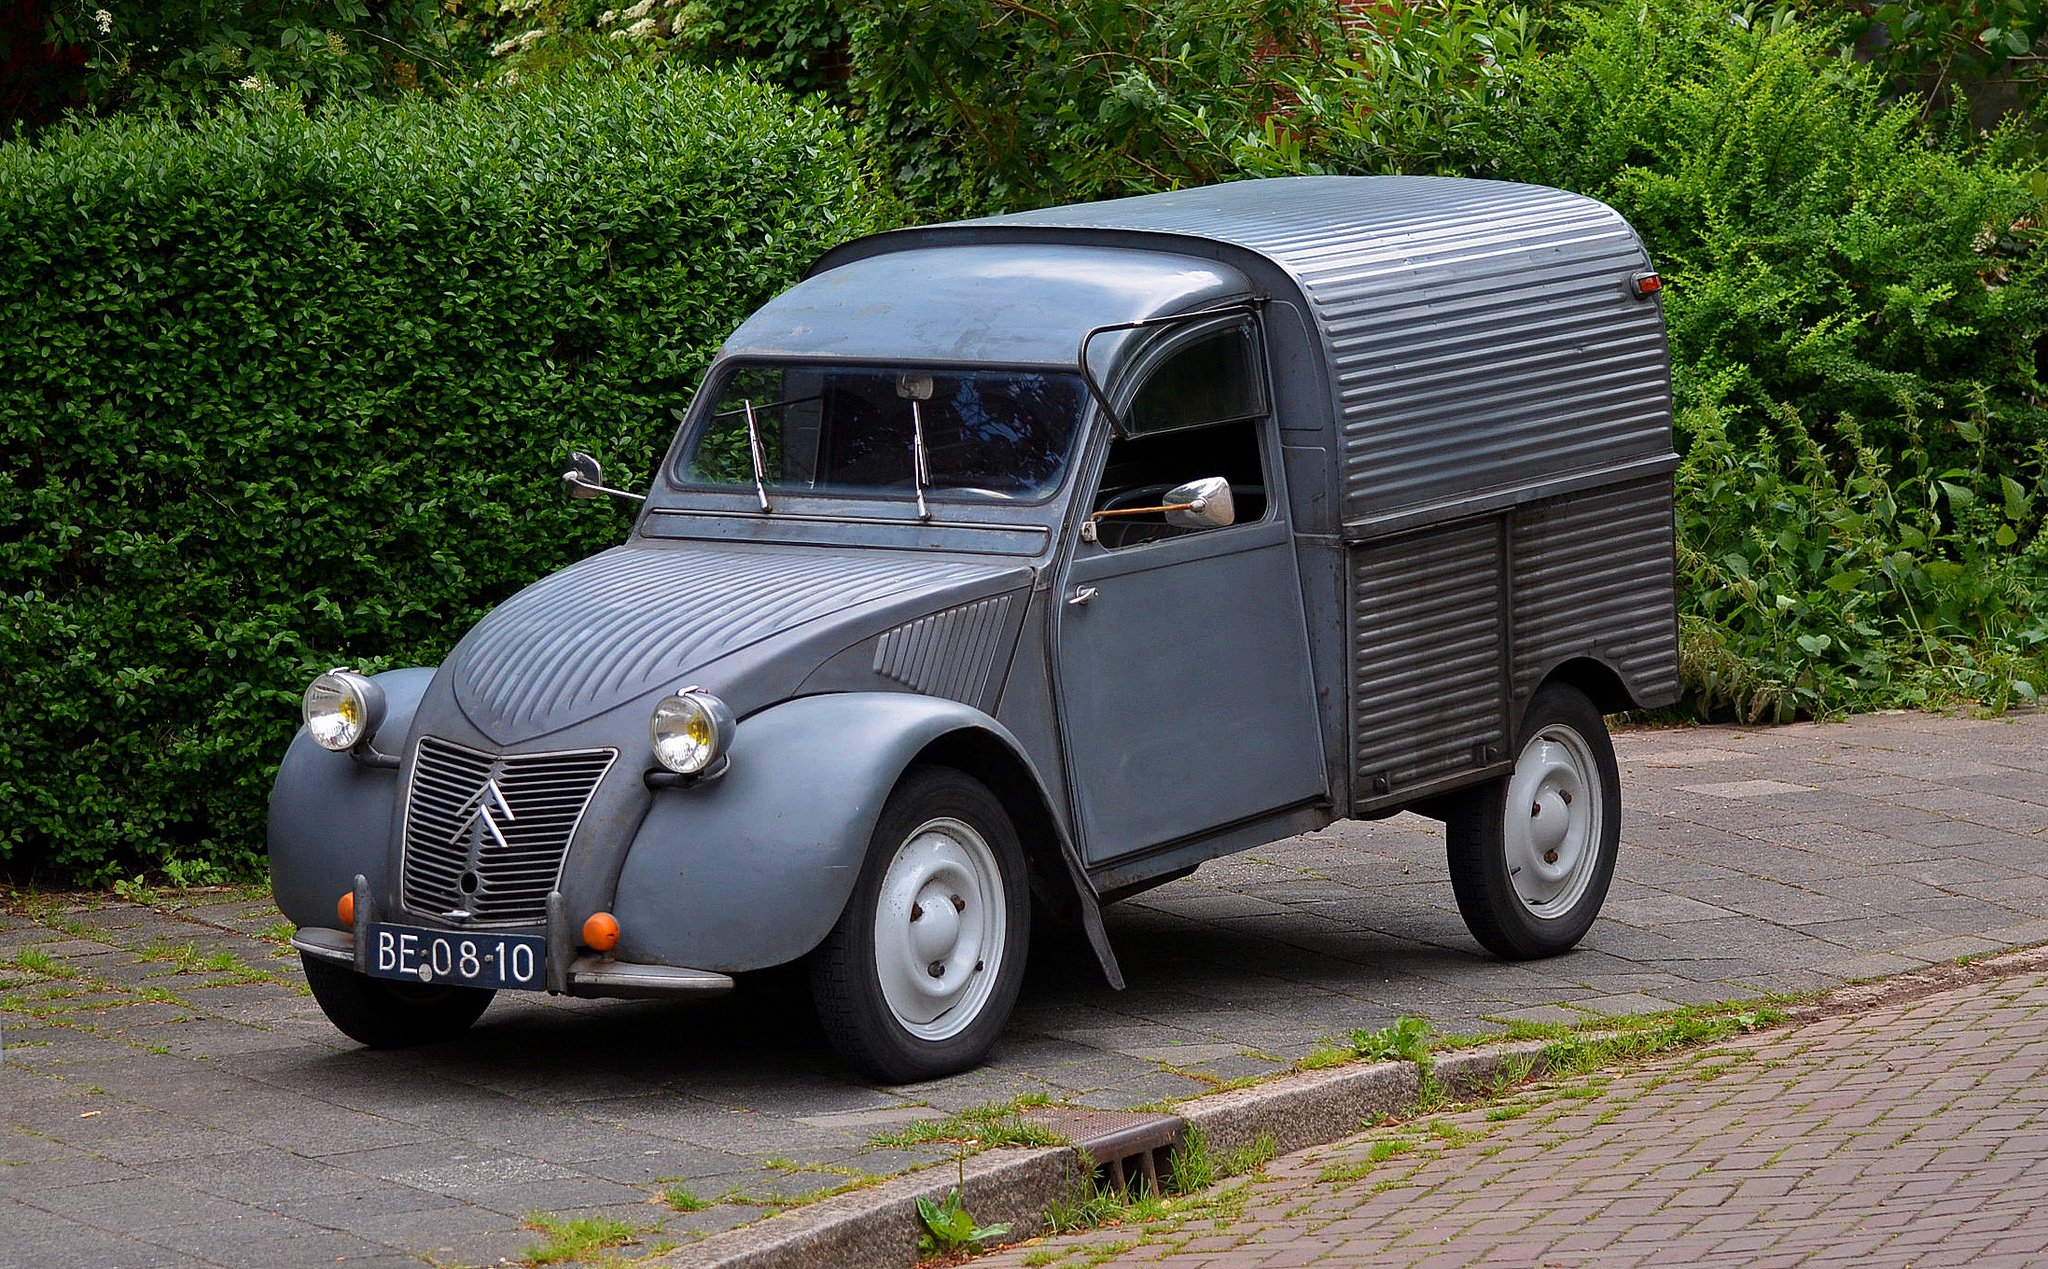 2cv, Citroen, Classic, Cars, French, Fourgonnette, Delivery Wallpaper